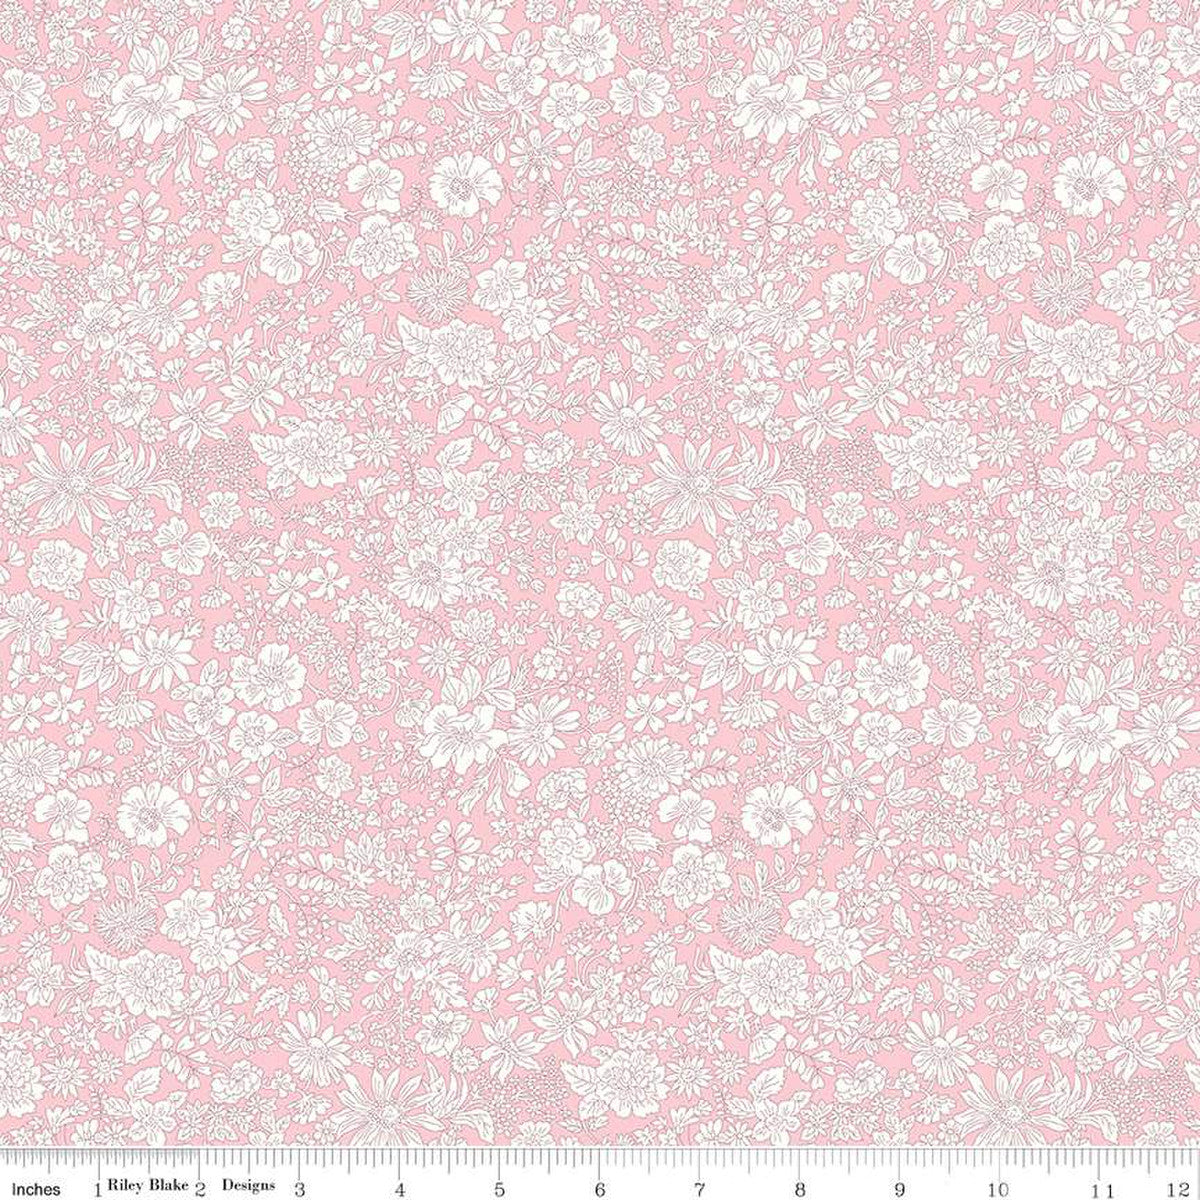 Candy Floss - Emily Belle - Liberty of London quilting cotton